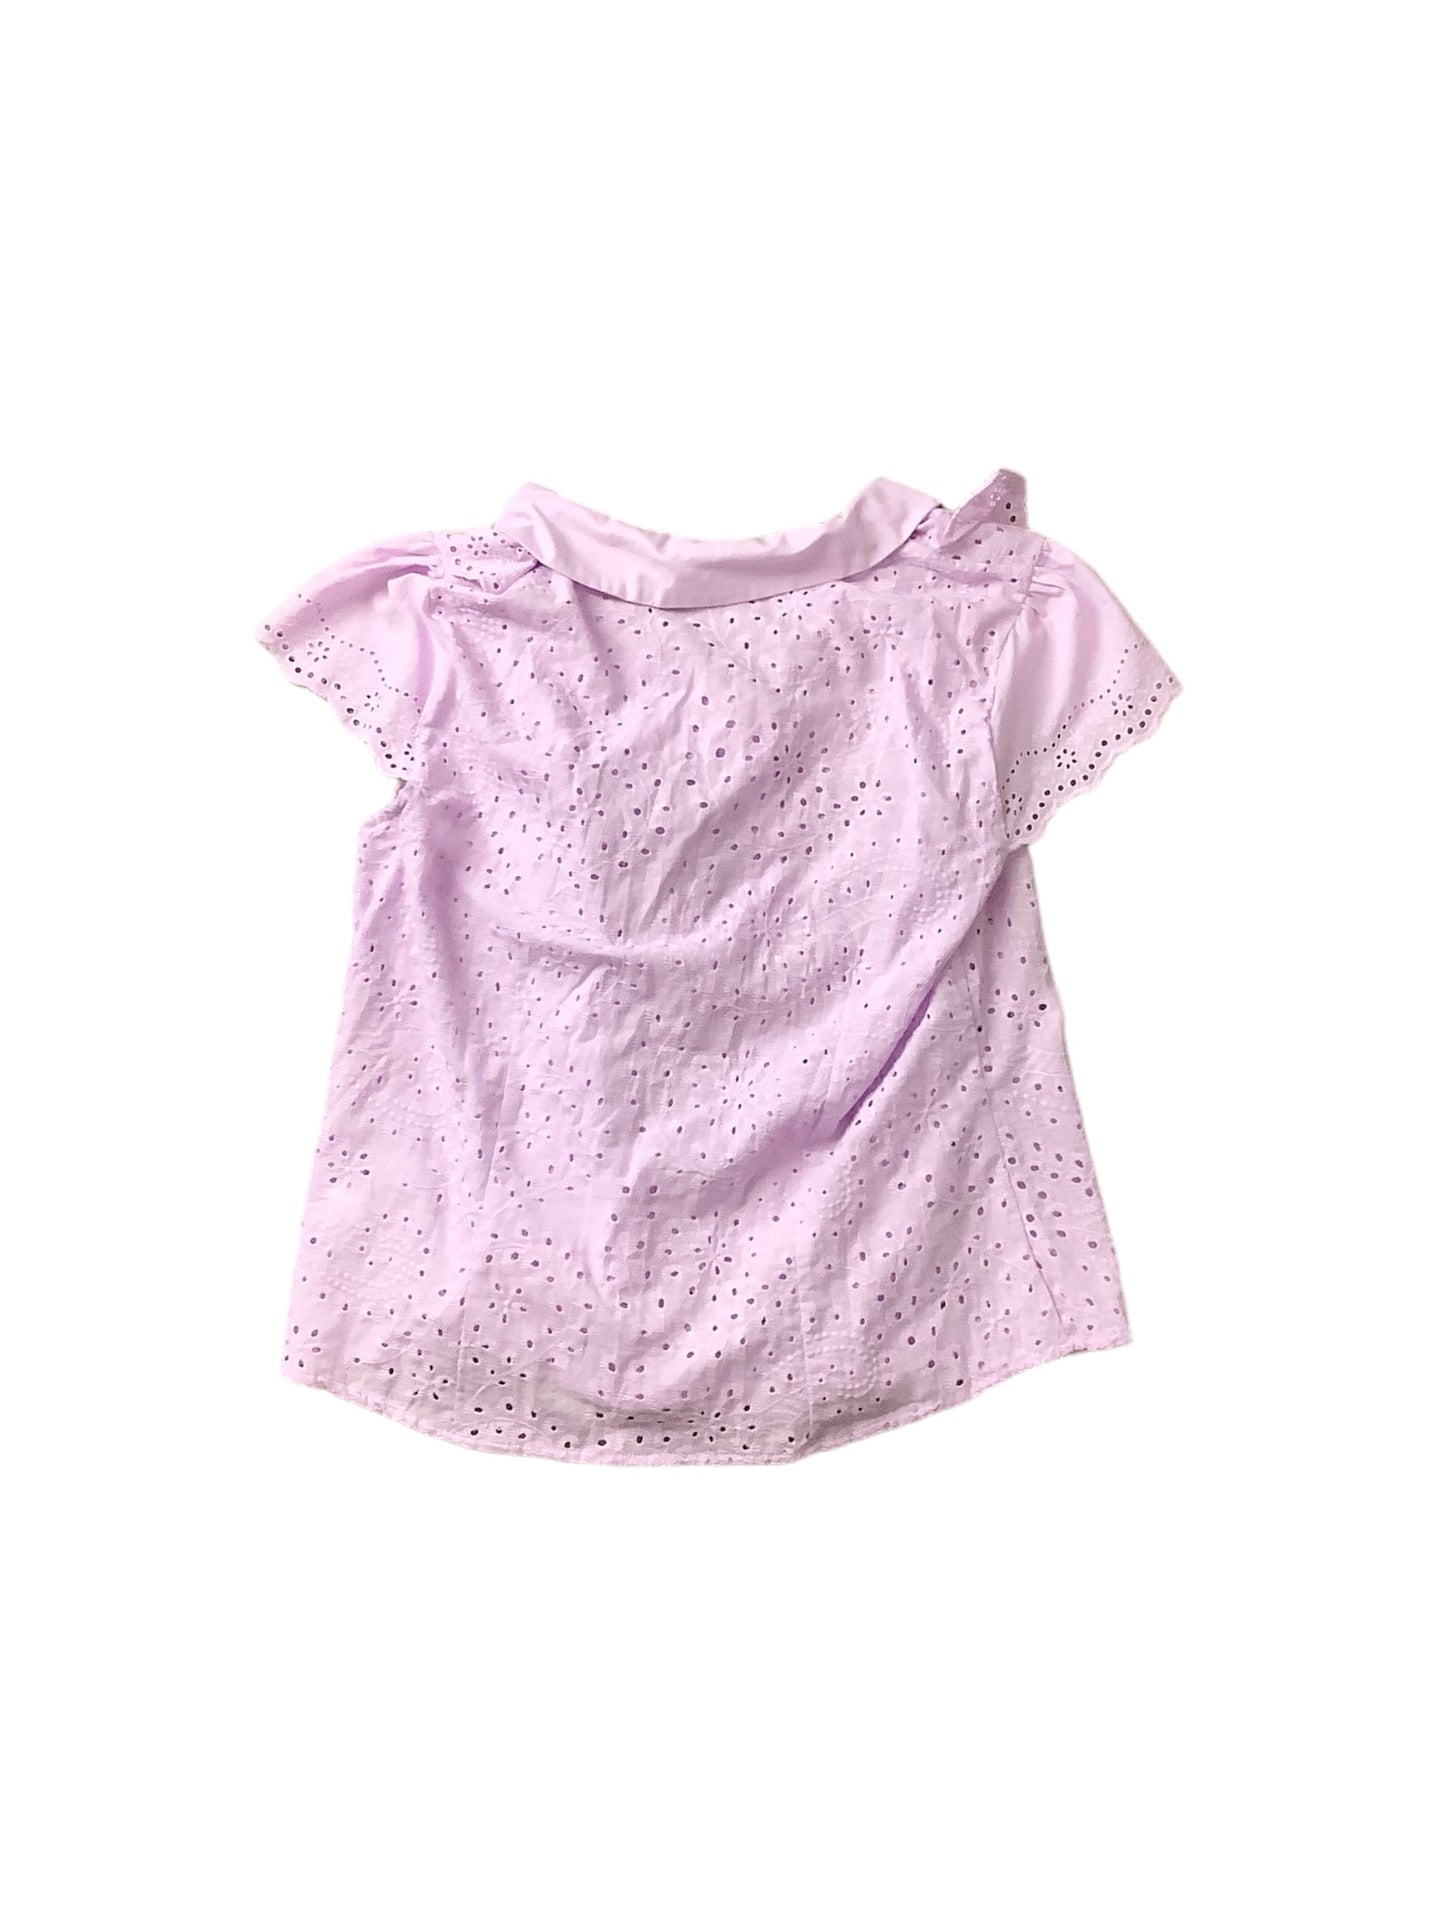 Purple Top Short Sleeve Basic New York And Co, Size Xl